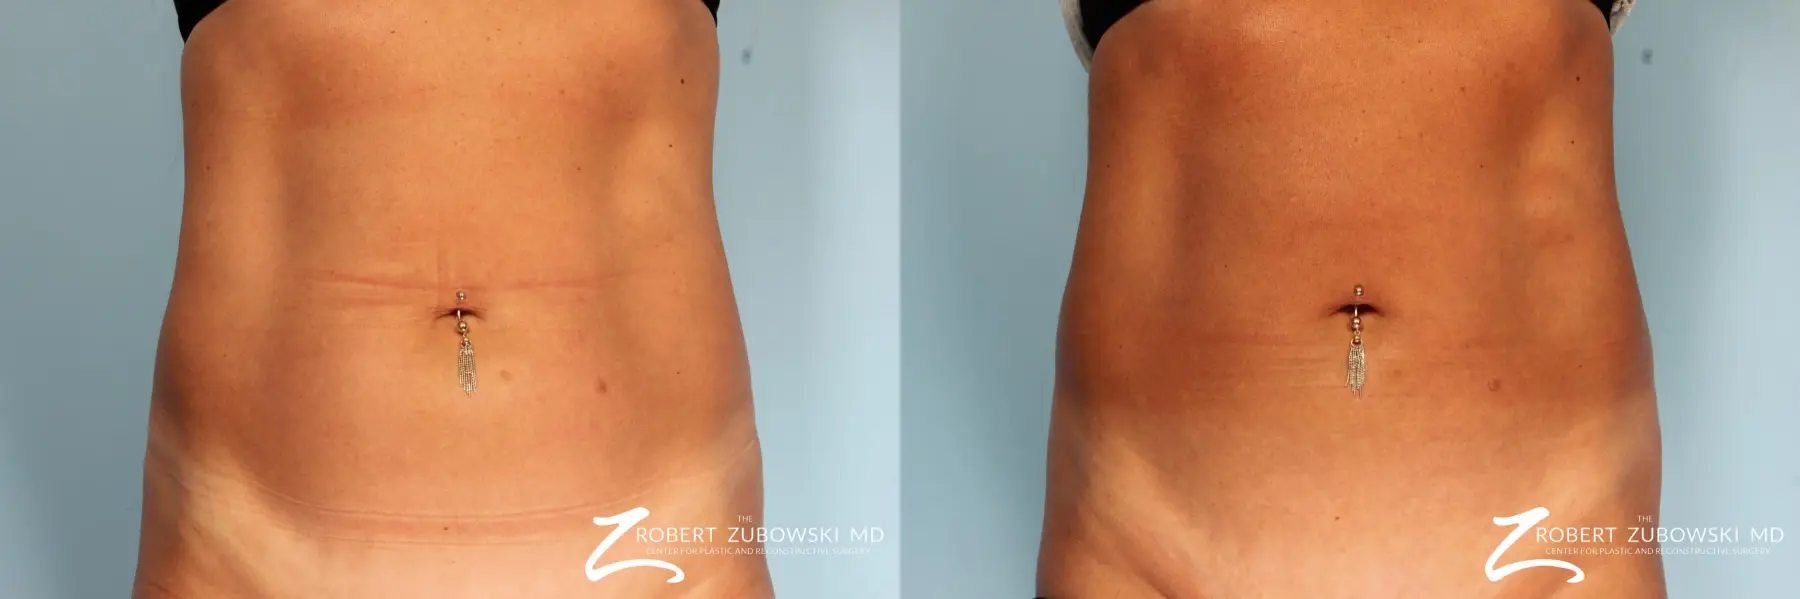 CoolSculpting®: Patient 2 - Before and After  